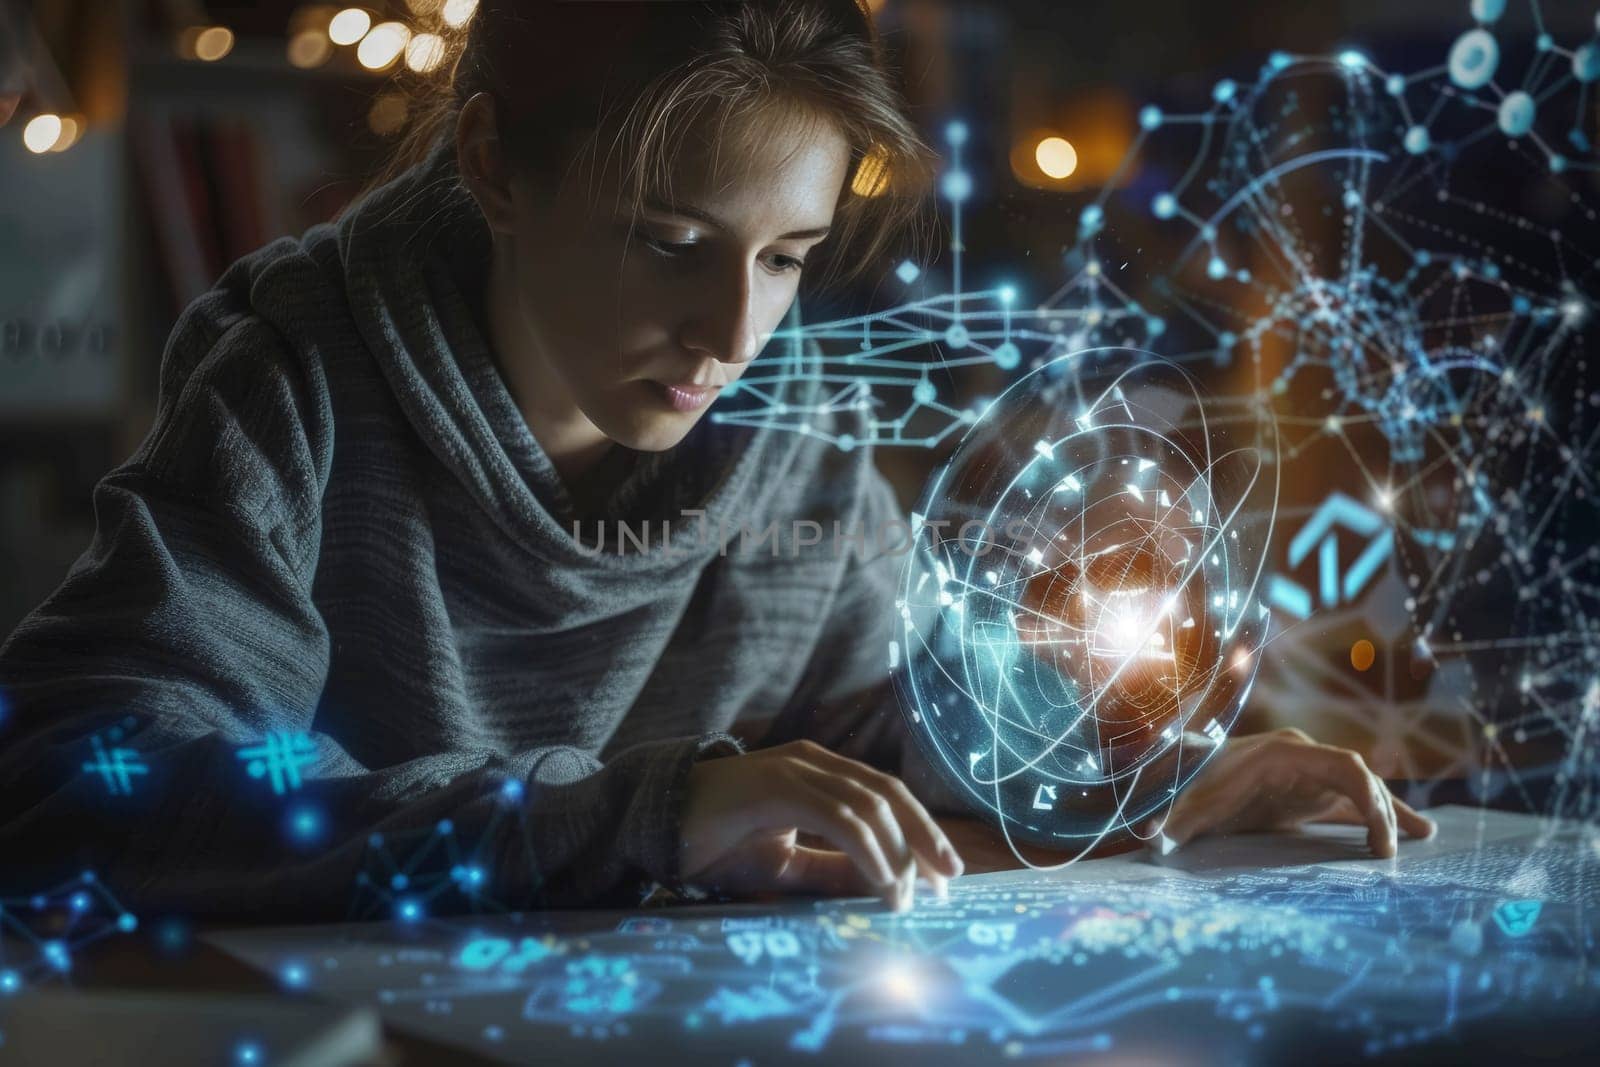 A learner engages with complex mathematical concepts, visualized through advanced technology. The intricate patterns of math become accessible and intriguing as she interacts with digital simulations